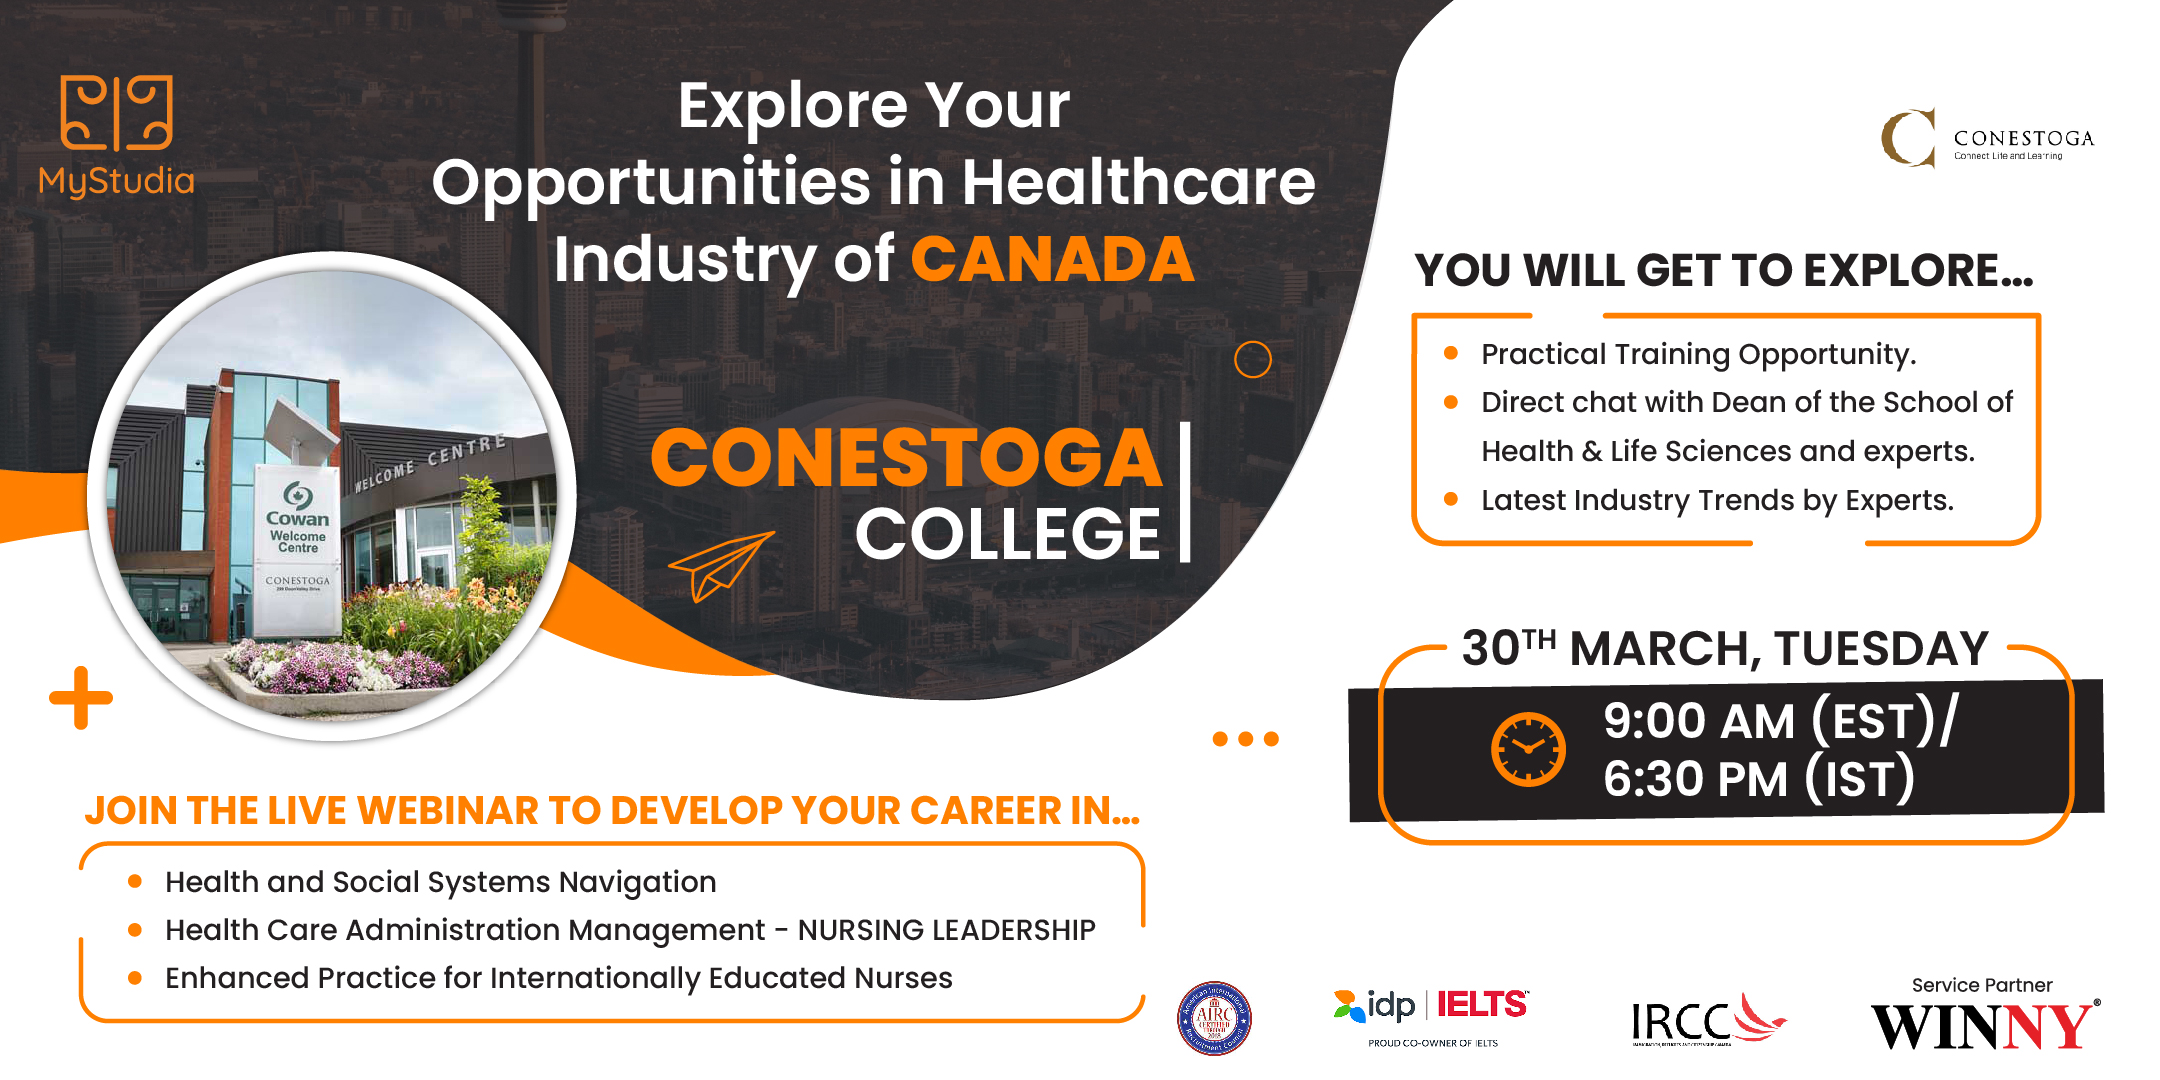 Conestoga College - Live Webinar to Develop your career in the Healthcare industry in Canada, Online Event